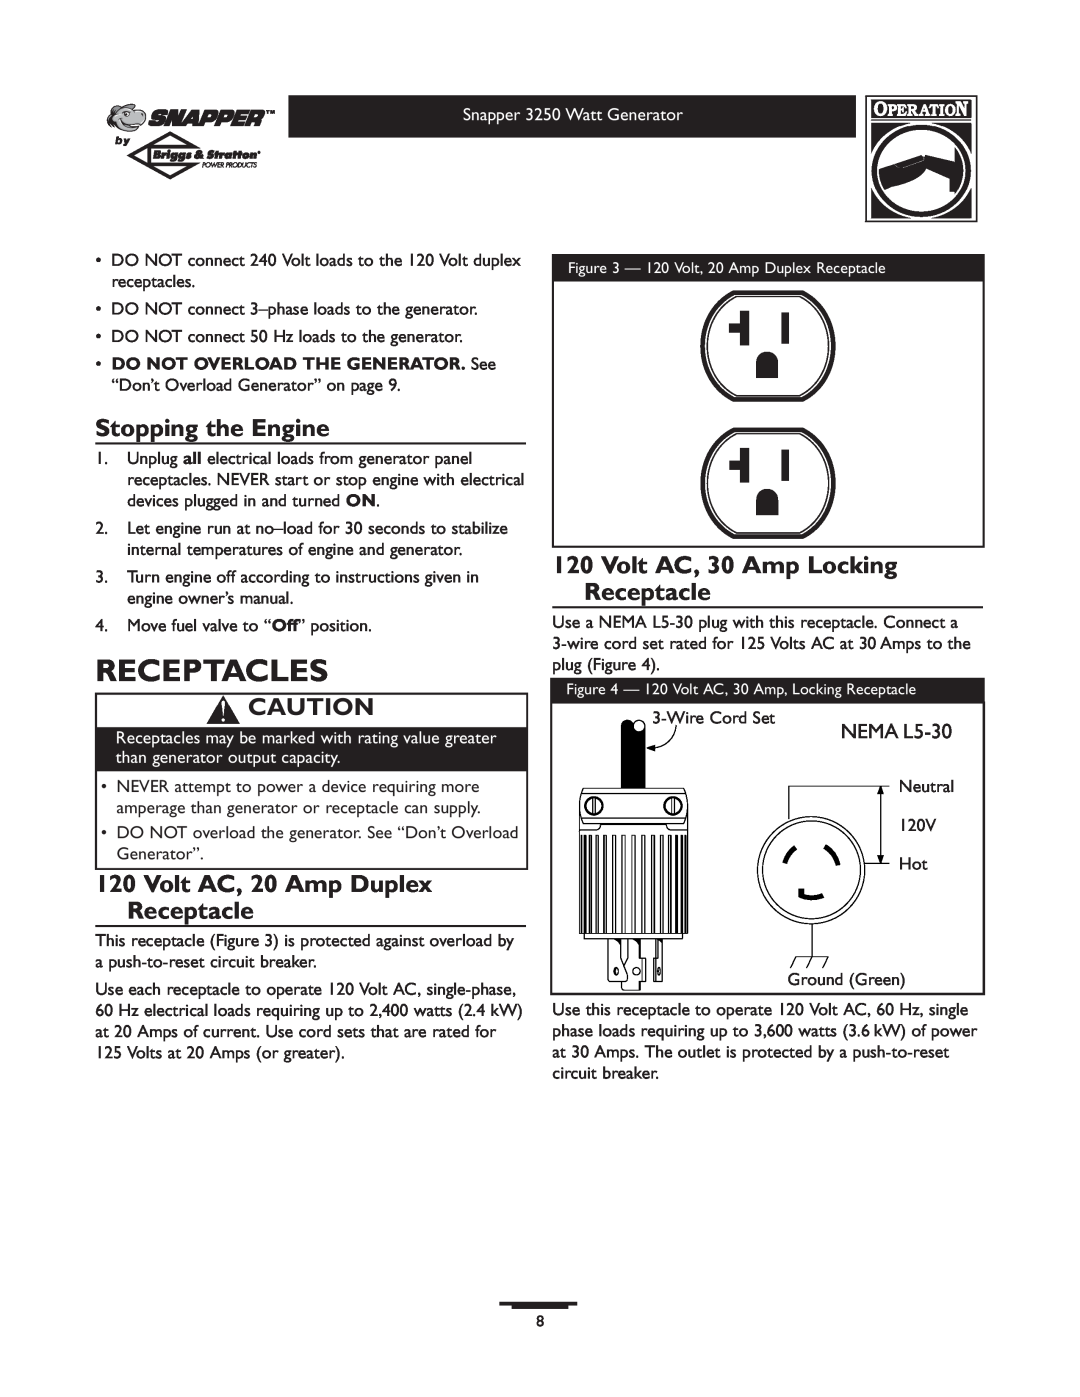 Snapper 1667-0 Receptacles, Stopping the Engine, Volt AC, 20 Amp Duplex Receptacle, Volt AC, 30 Amp Locking Receptacle 